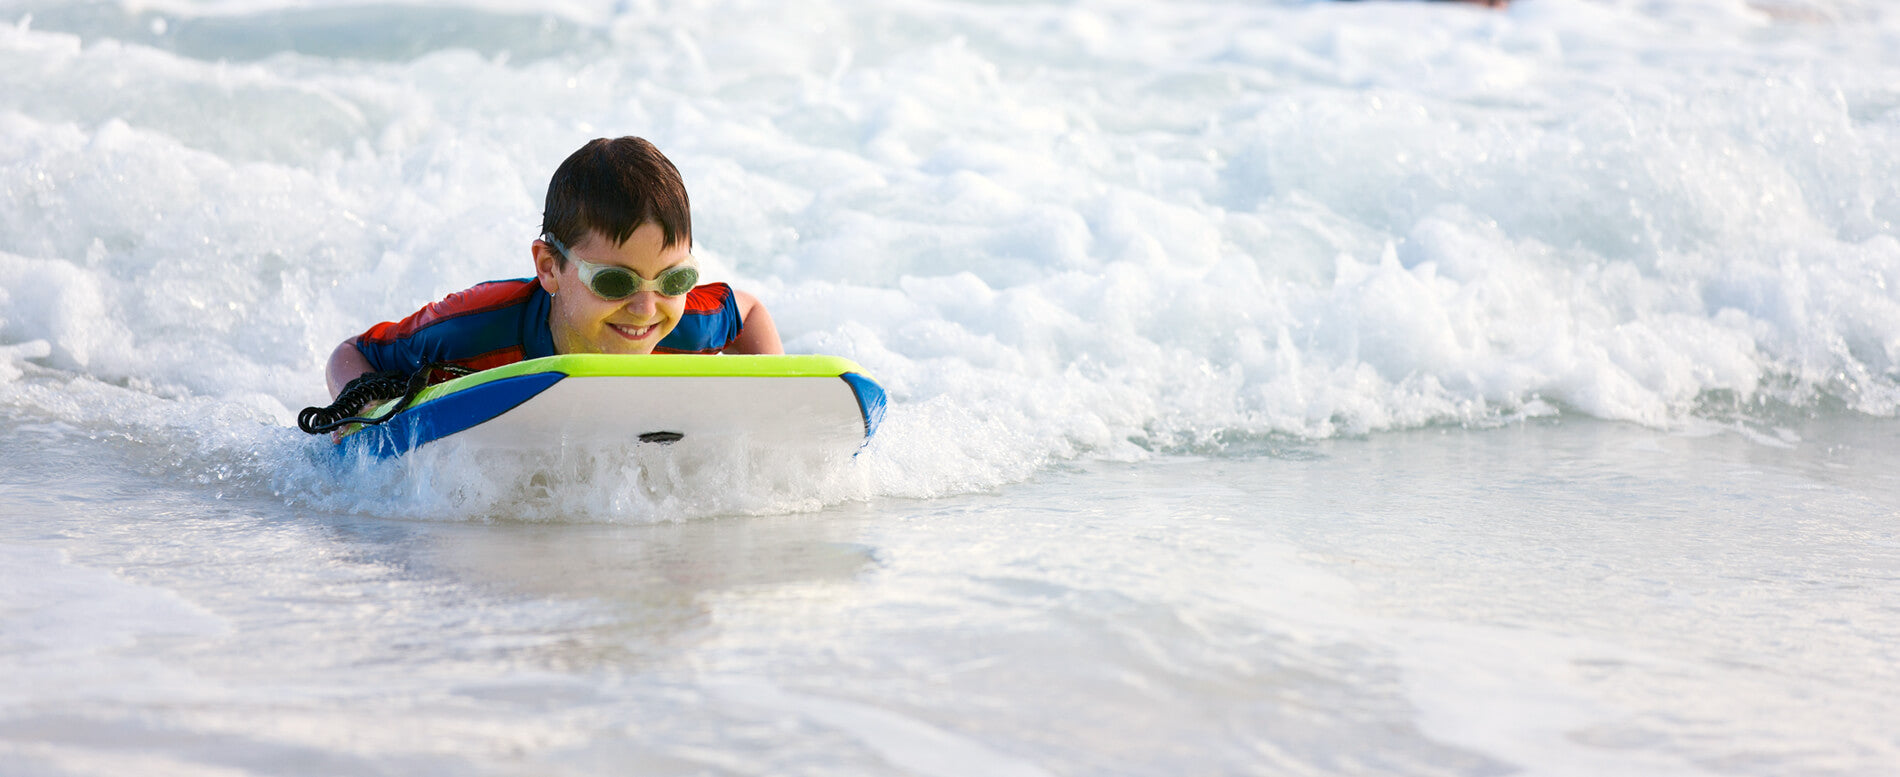 5 Best Inflatable Boogie Boards For All The Family: A Buyer’s Guide